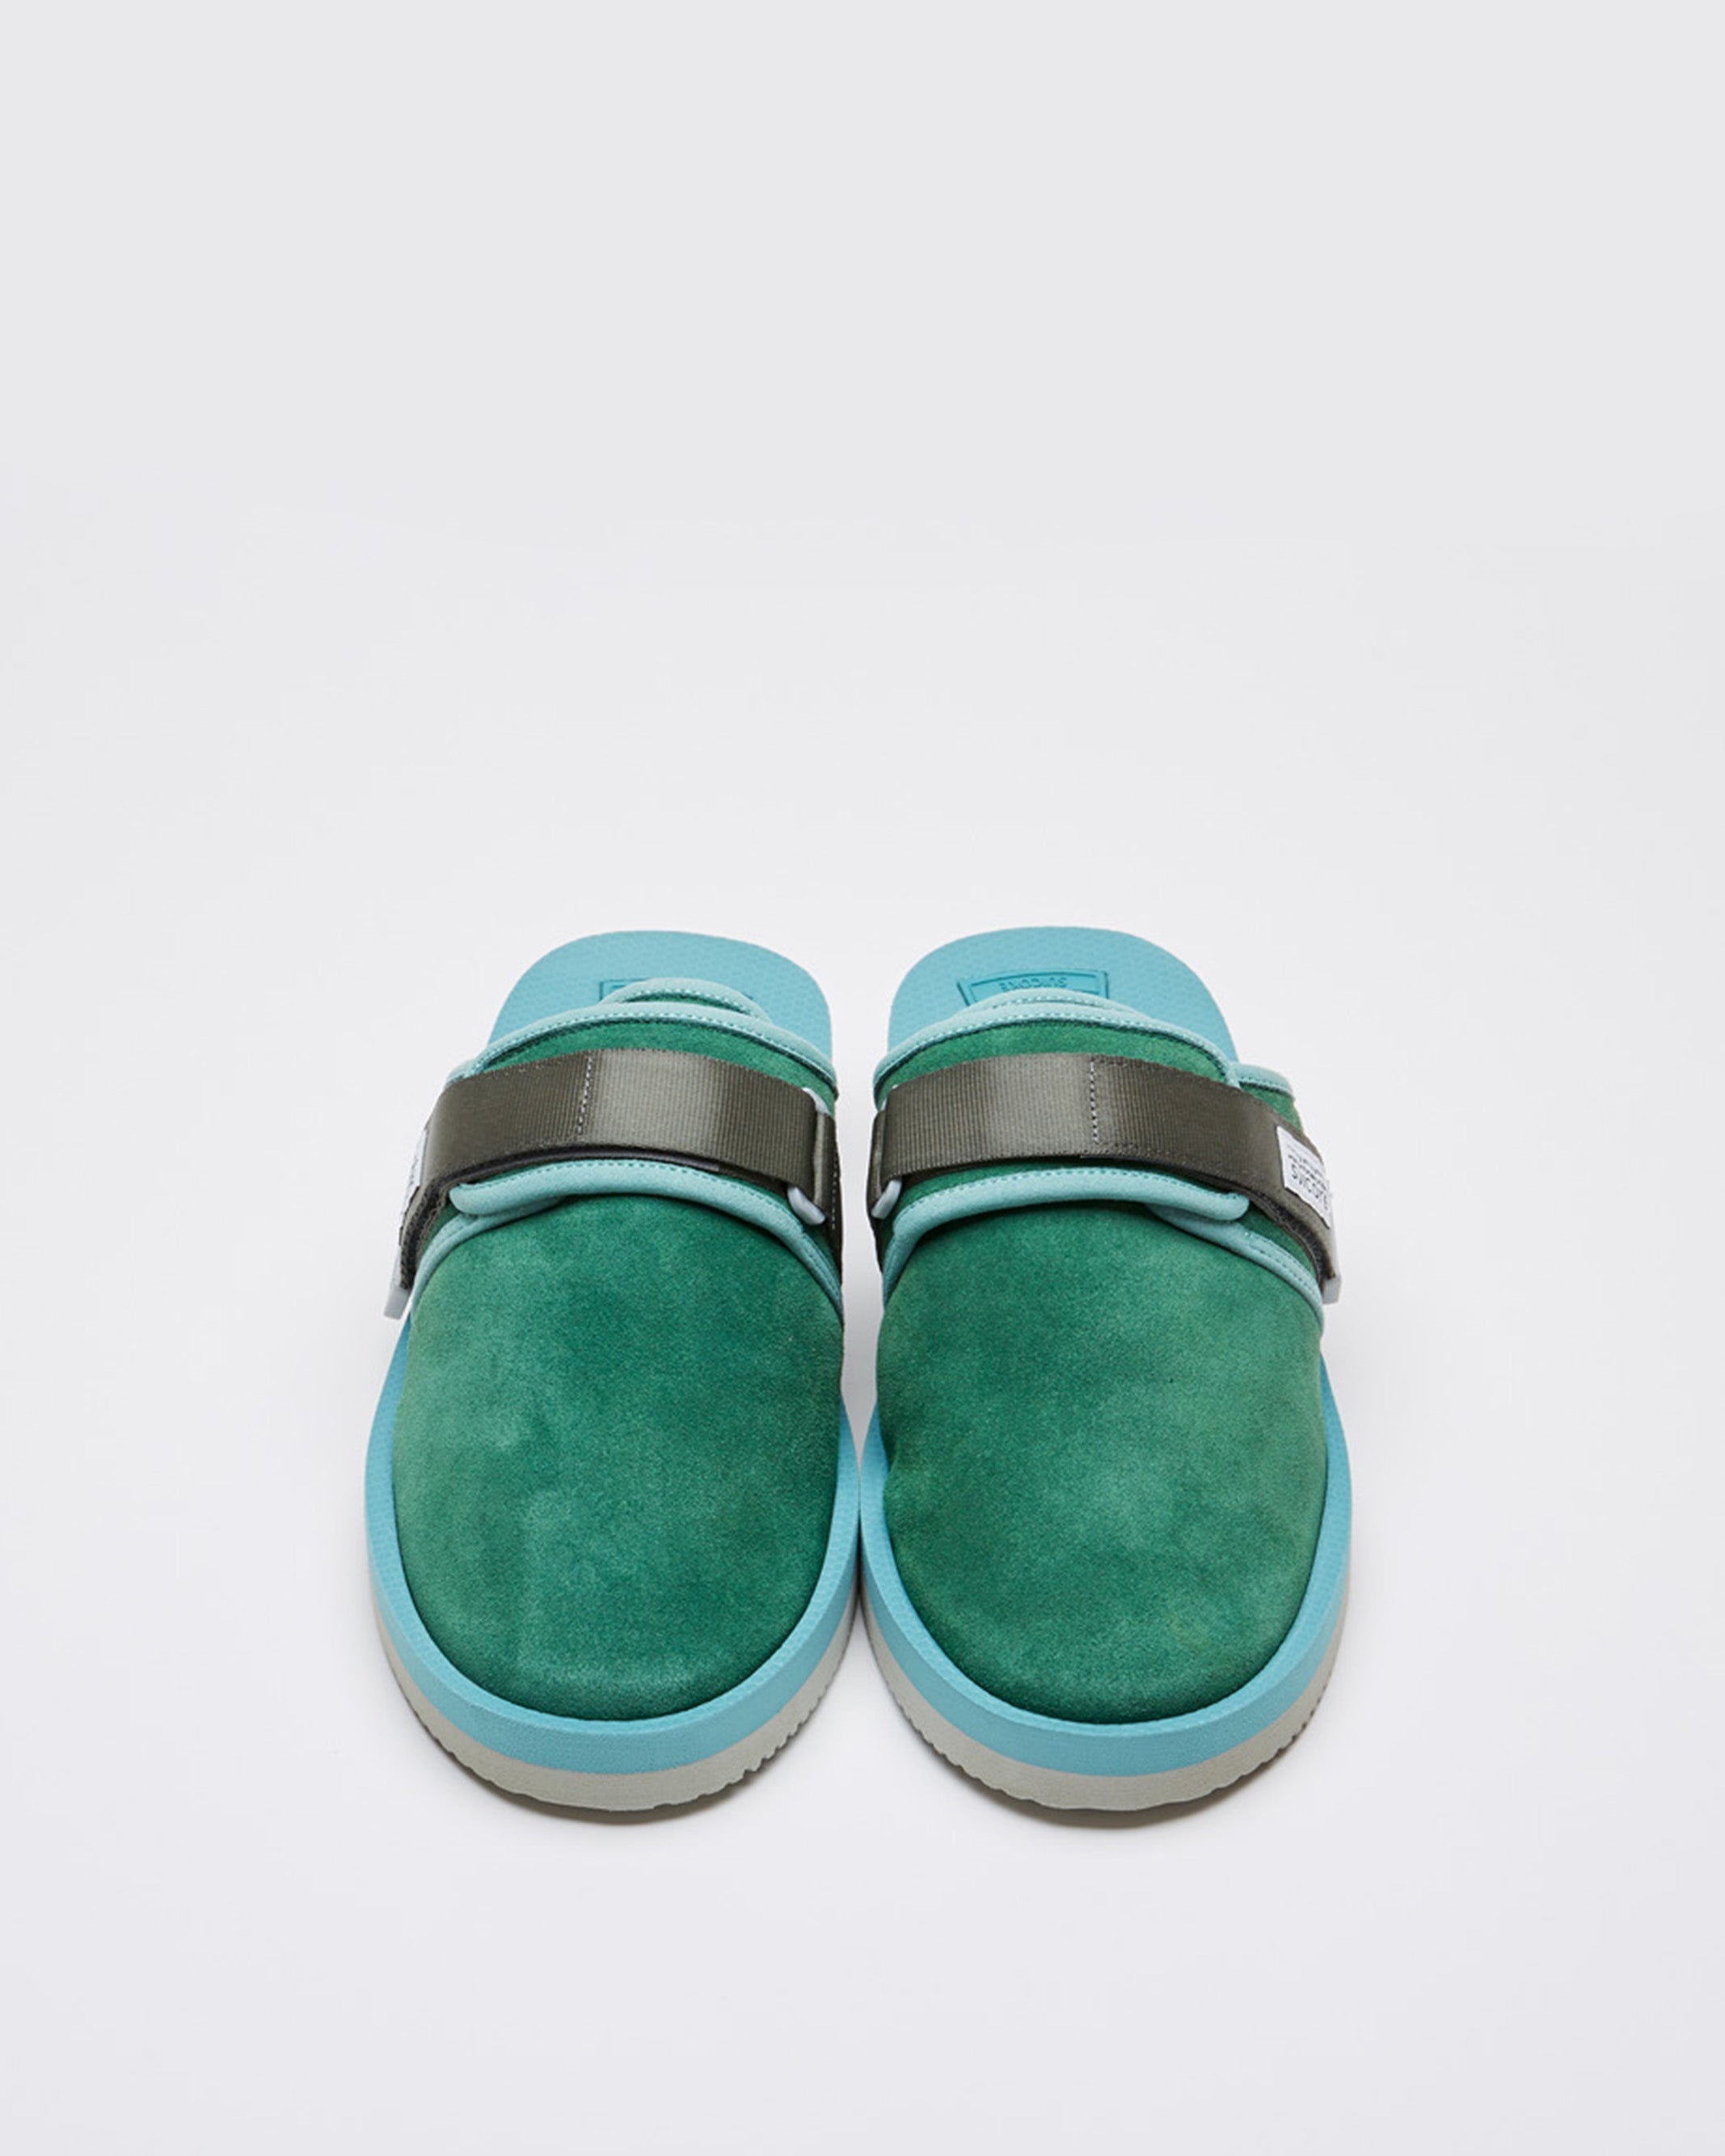 SUICOKE ZAVO-VS in Sage x Teal OG-072VS | Shop from eightywingold an official brand partner for SUICOKE Canada and US.